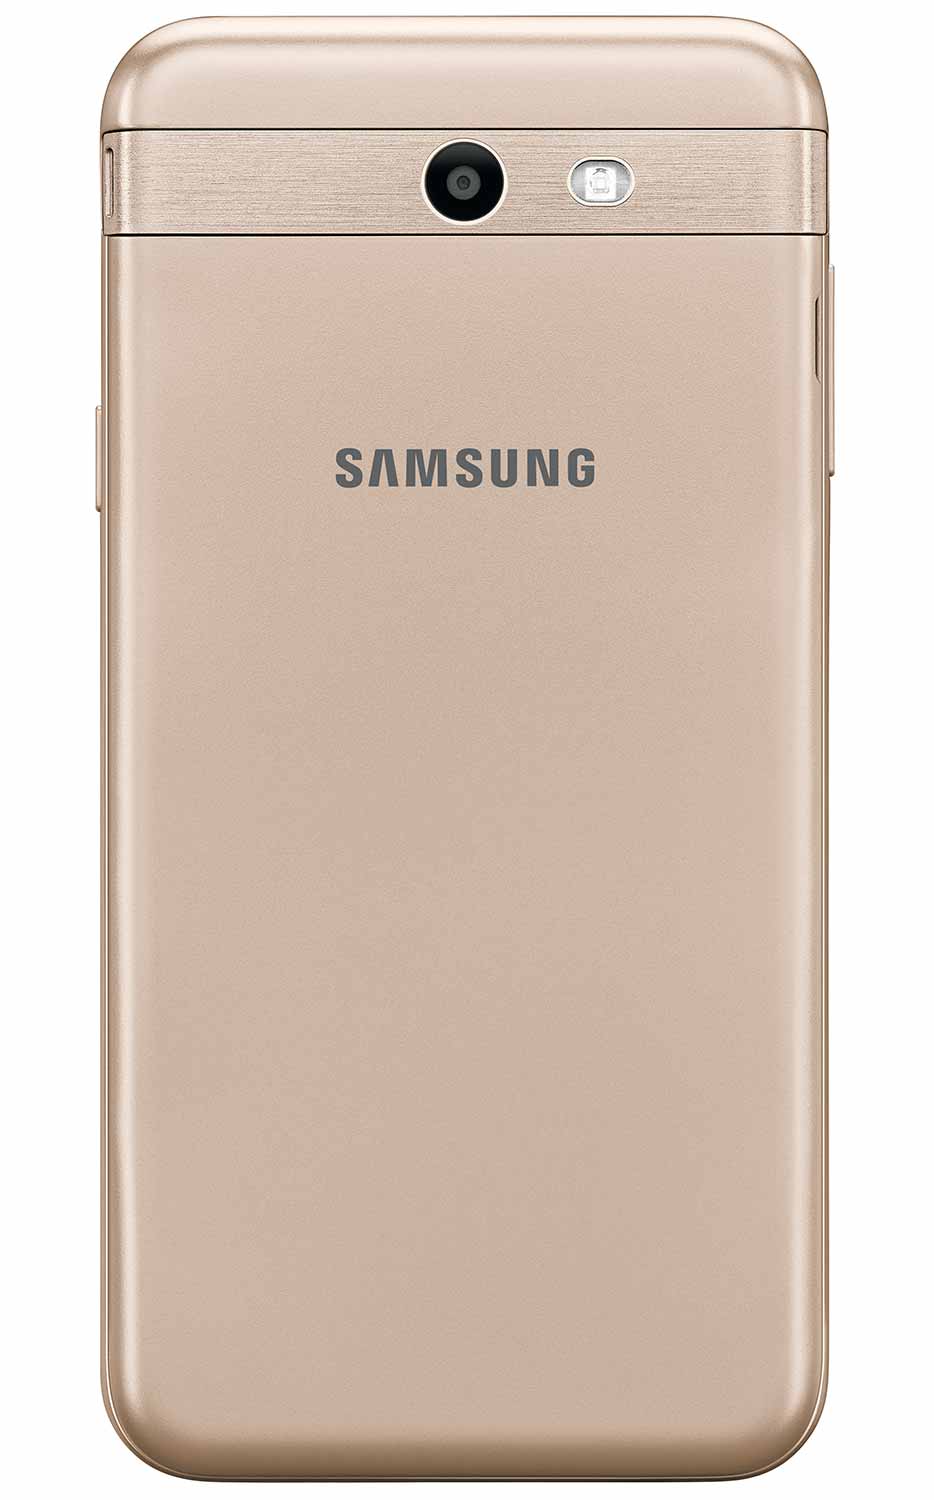 Samsung Galaxy J7 Prime Price In Pakistan - Specifications, Reviews